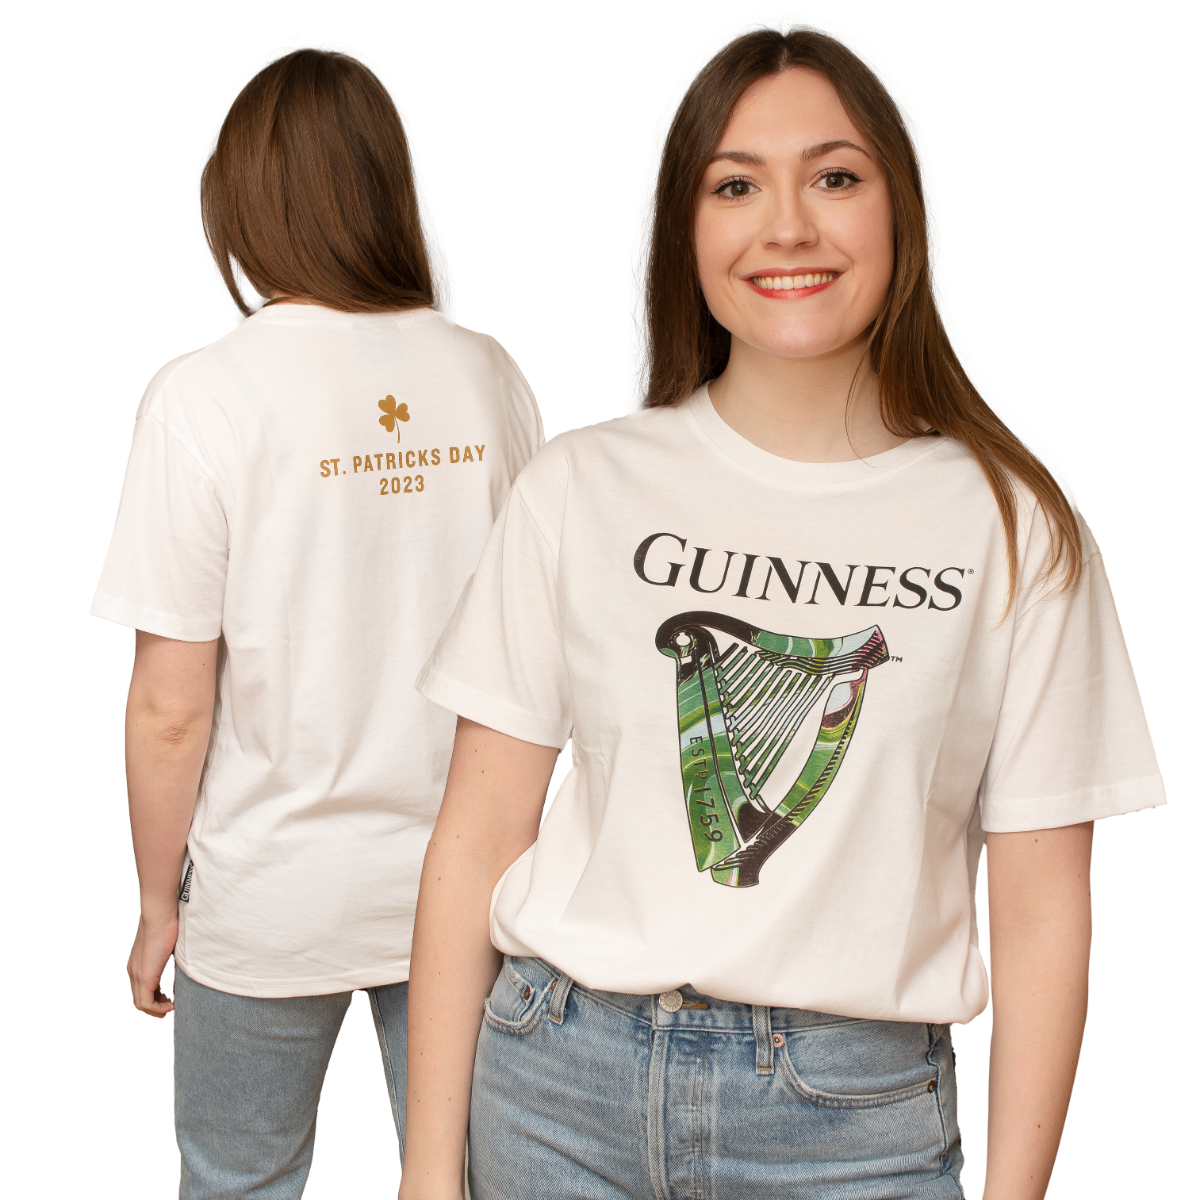 Guinness Limited Edition St Patrick's Day 2023 White Tee